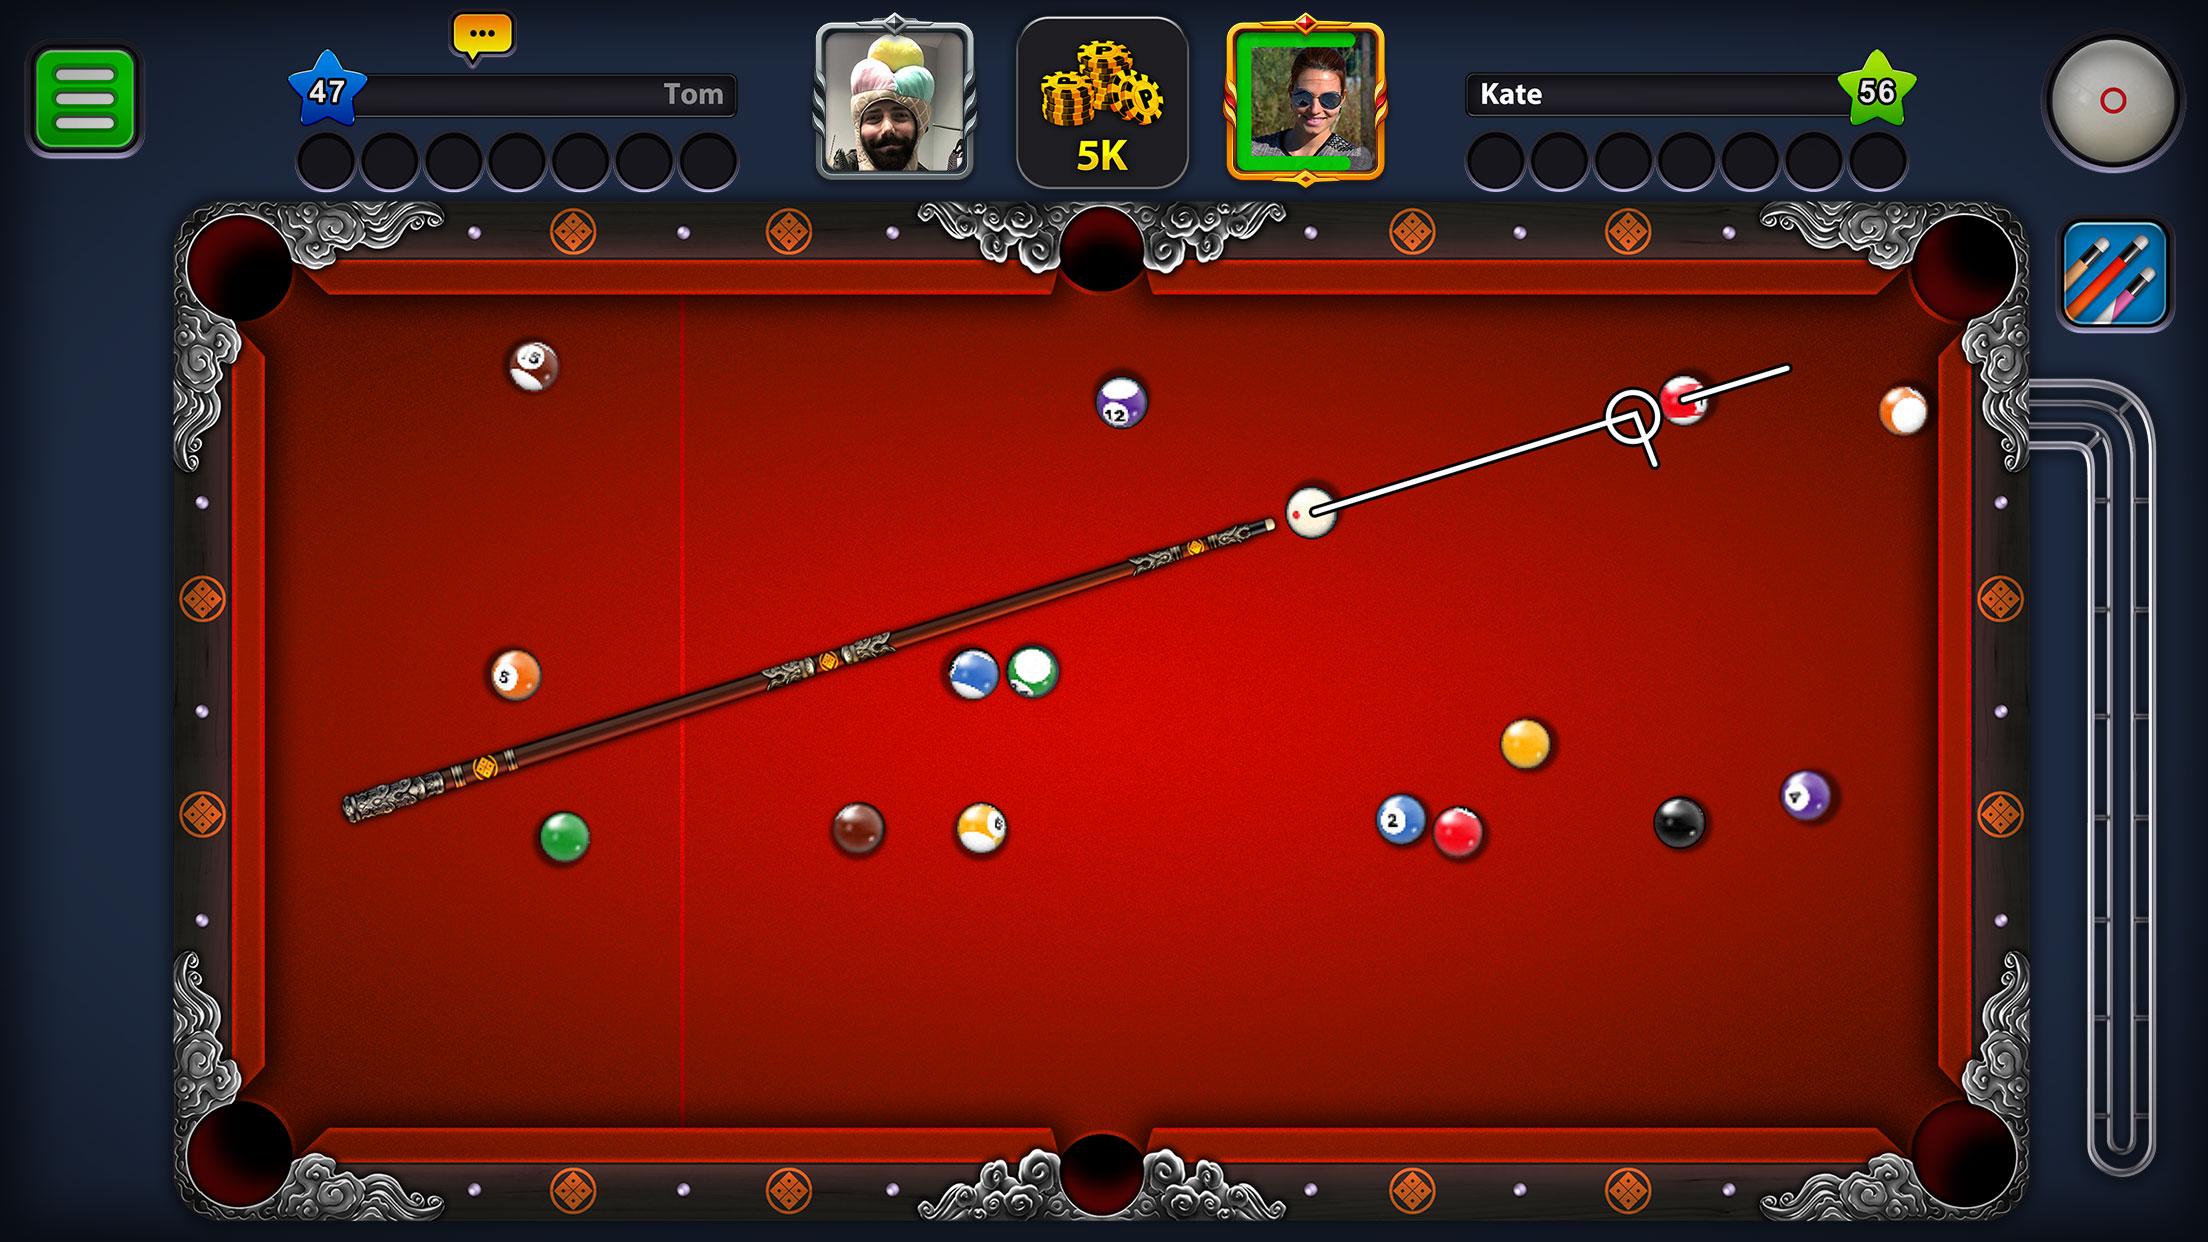 How to Play 8 Ball Pool on PC